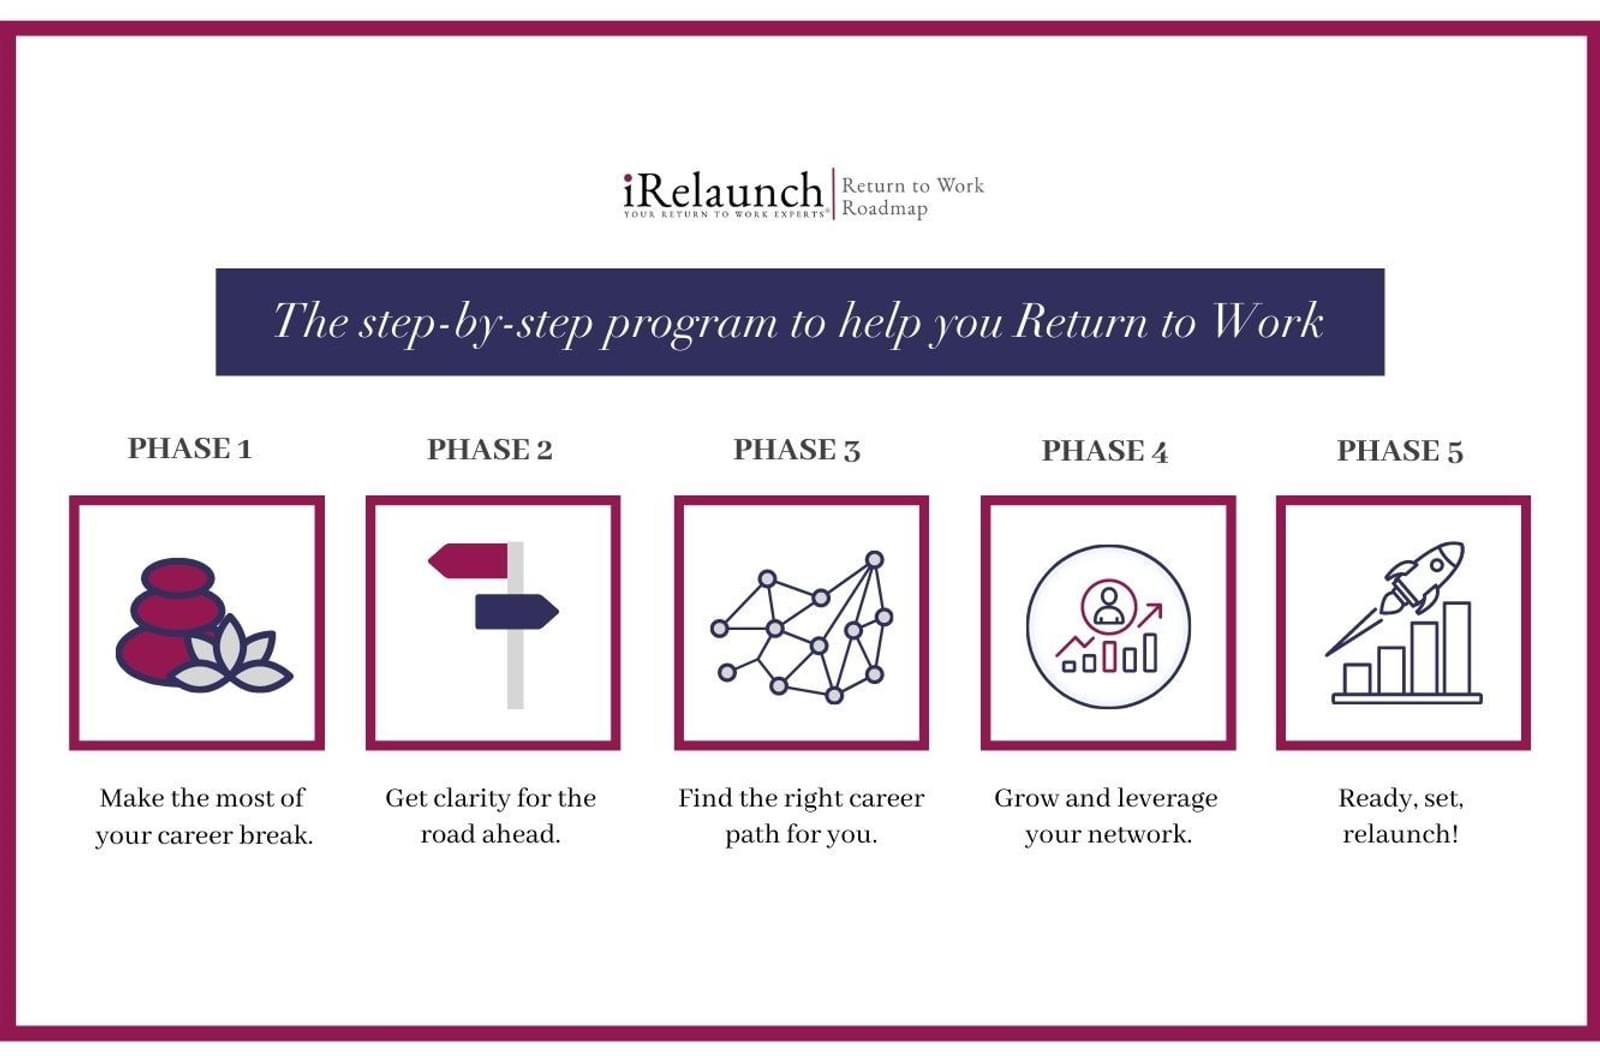 iRelaunch Return to Work Roadmap All Phases Graphic with Border stock